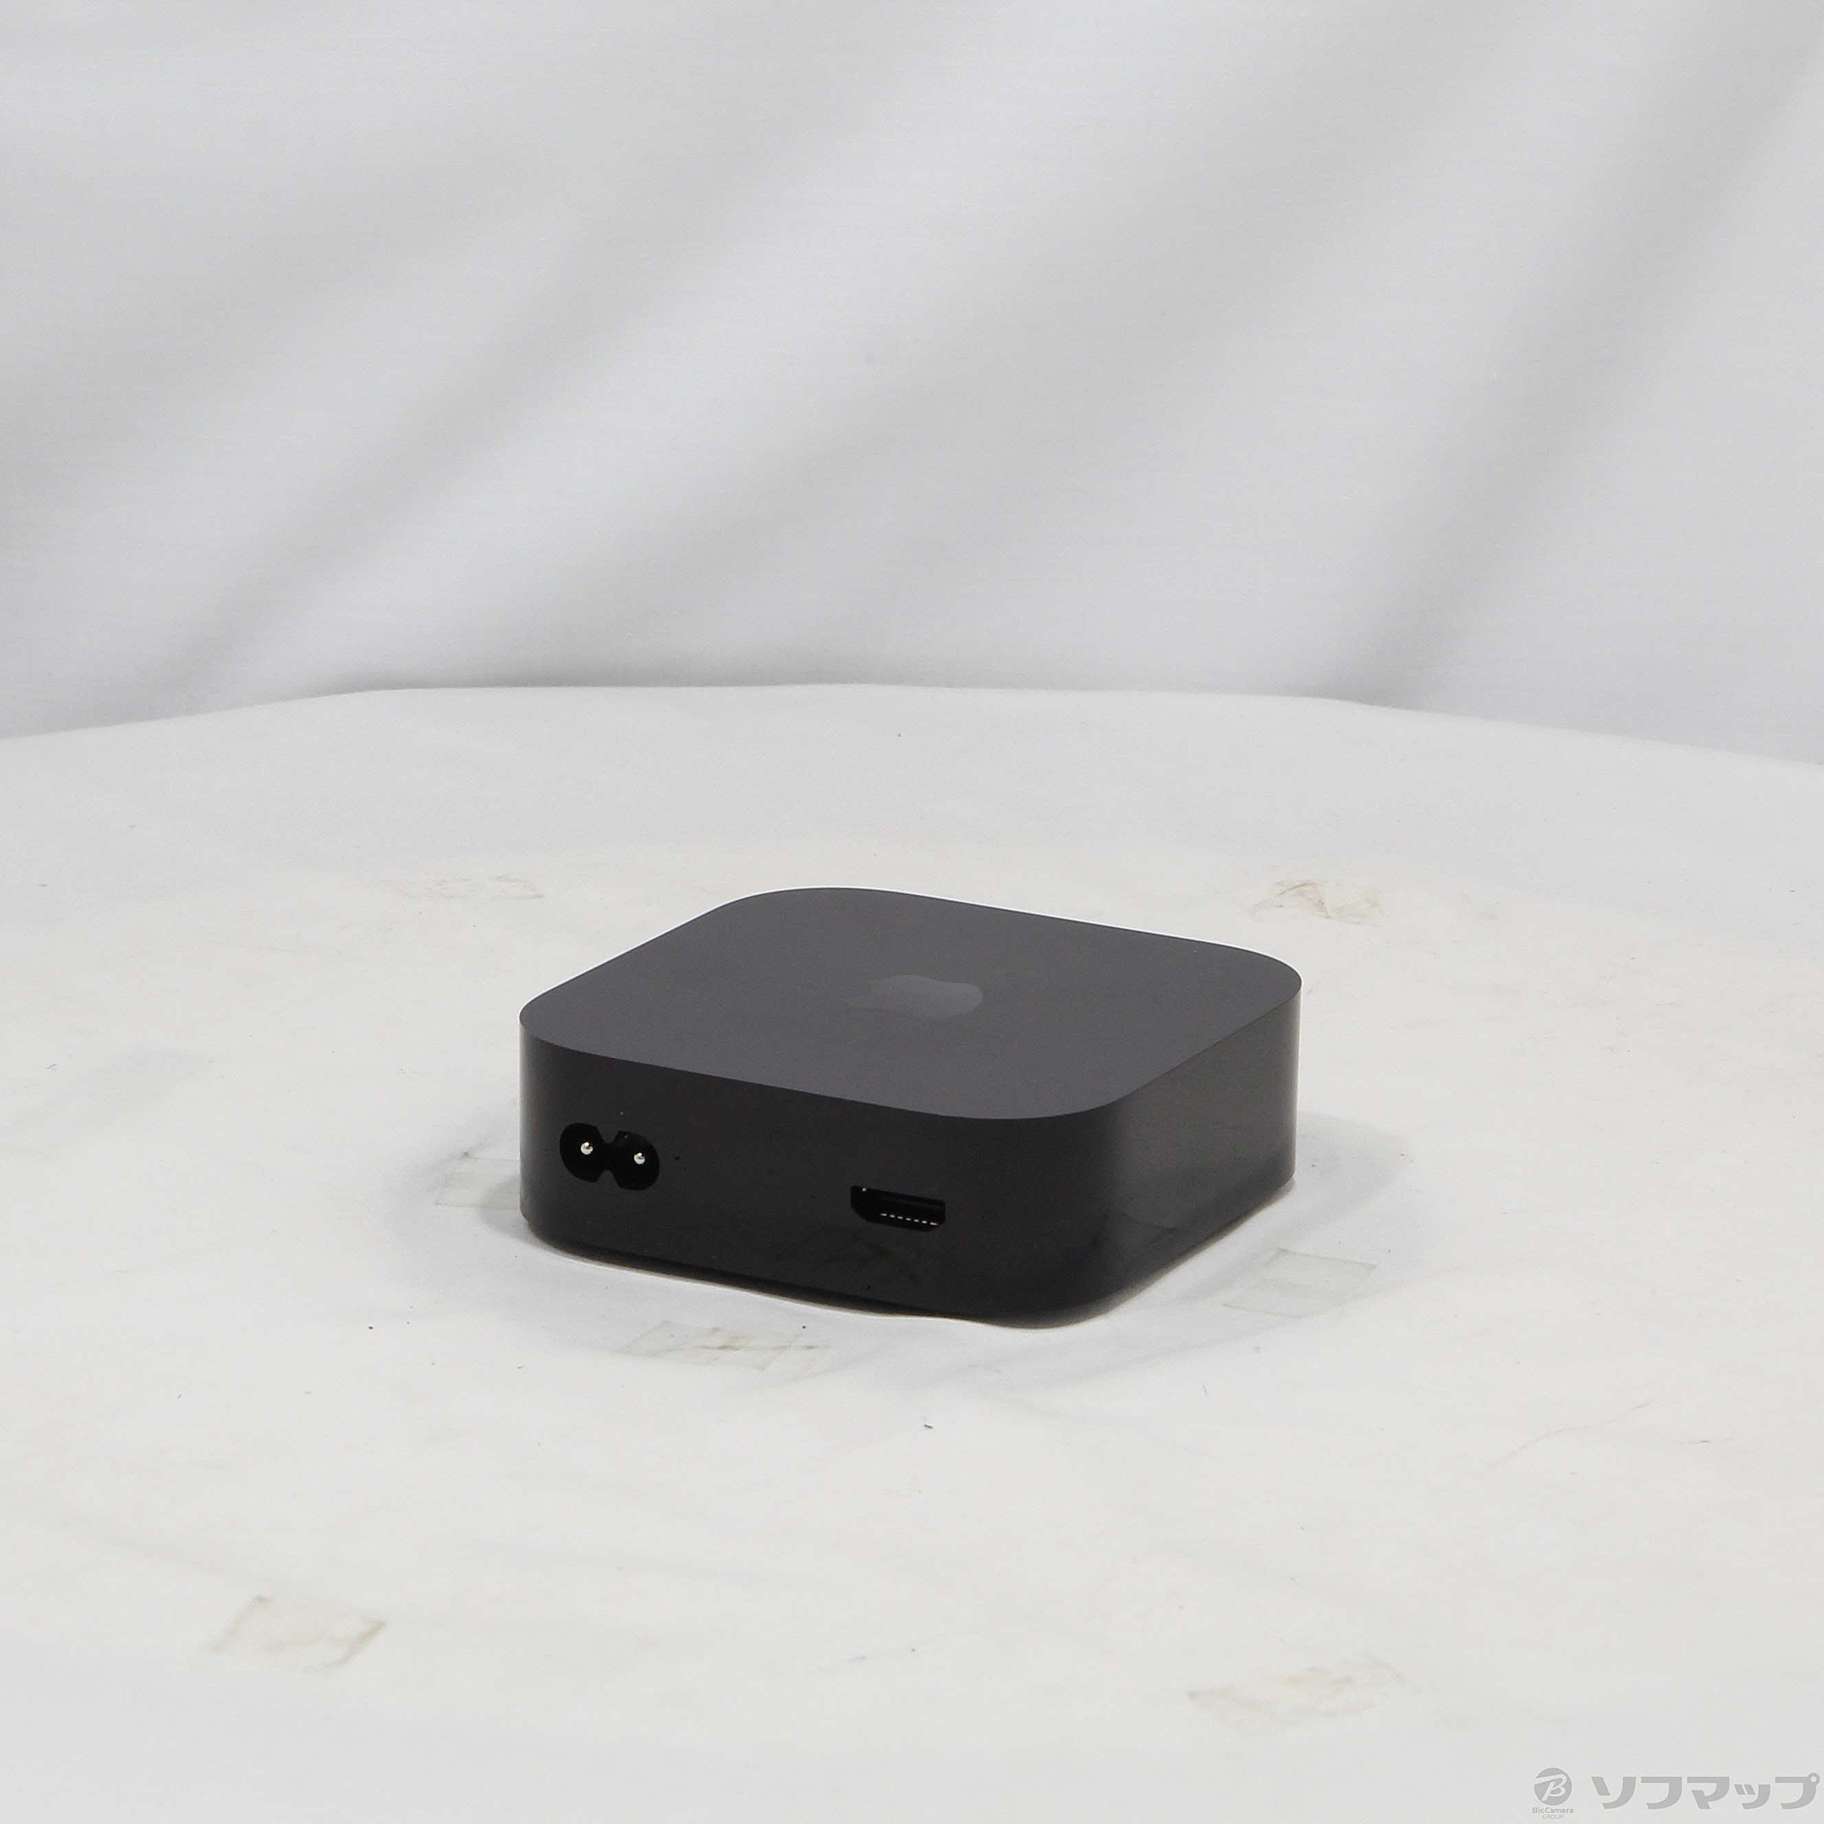 中古】Apple TV 4K 第3世代 64GB Wi-Fiモデル MN873J／A ...